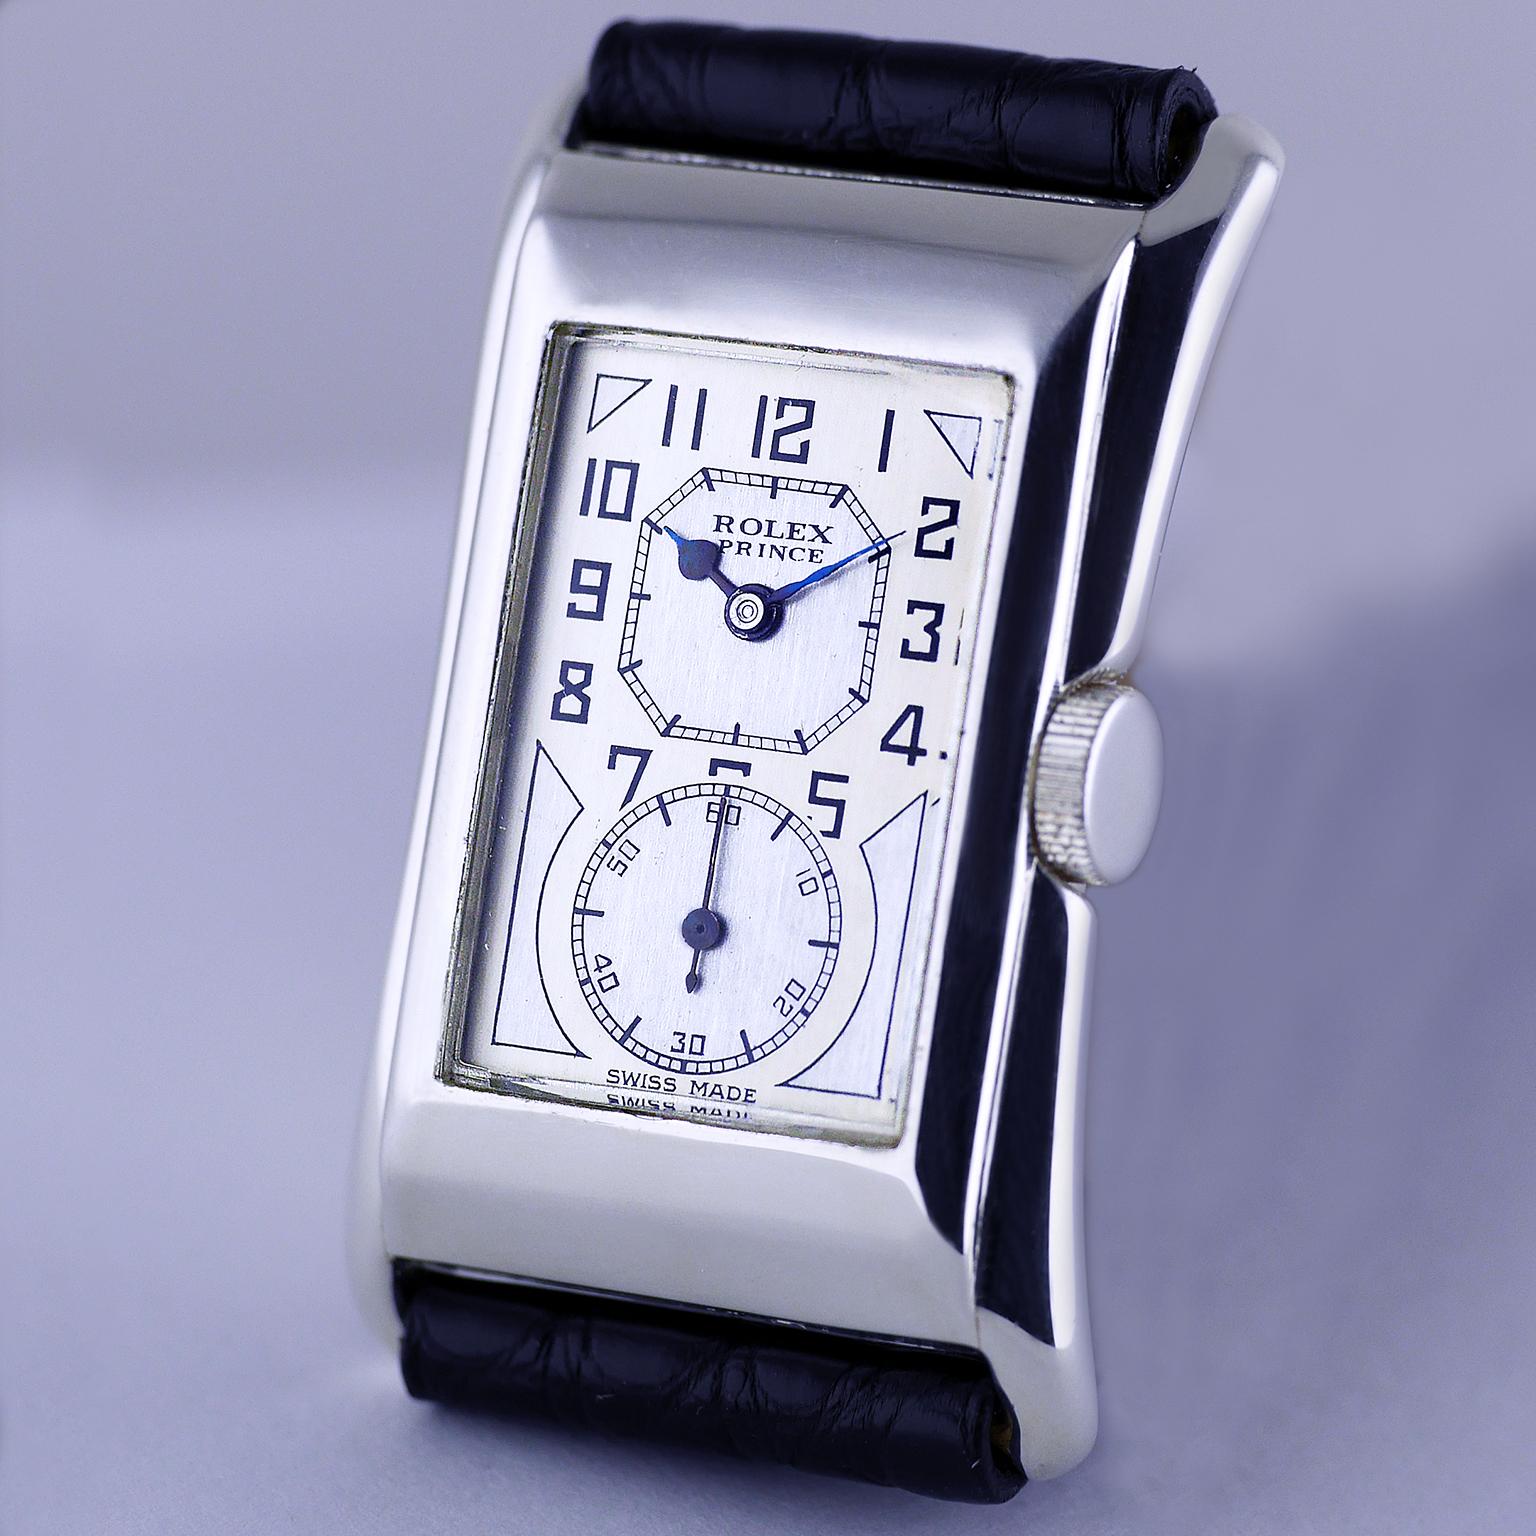 A very rare, fine and well-preserved Art Deco vintage wristwatch in silver by Rolex made in 1930. 

“The Rolex Prince - the watch for men of distinction”

If there was ever an accessory that identified one as a man of distinction it is the Rolex